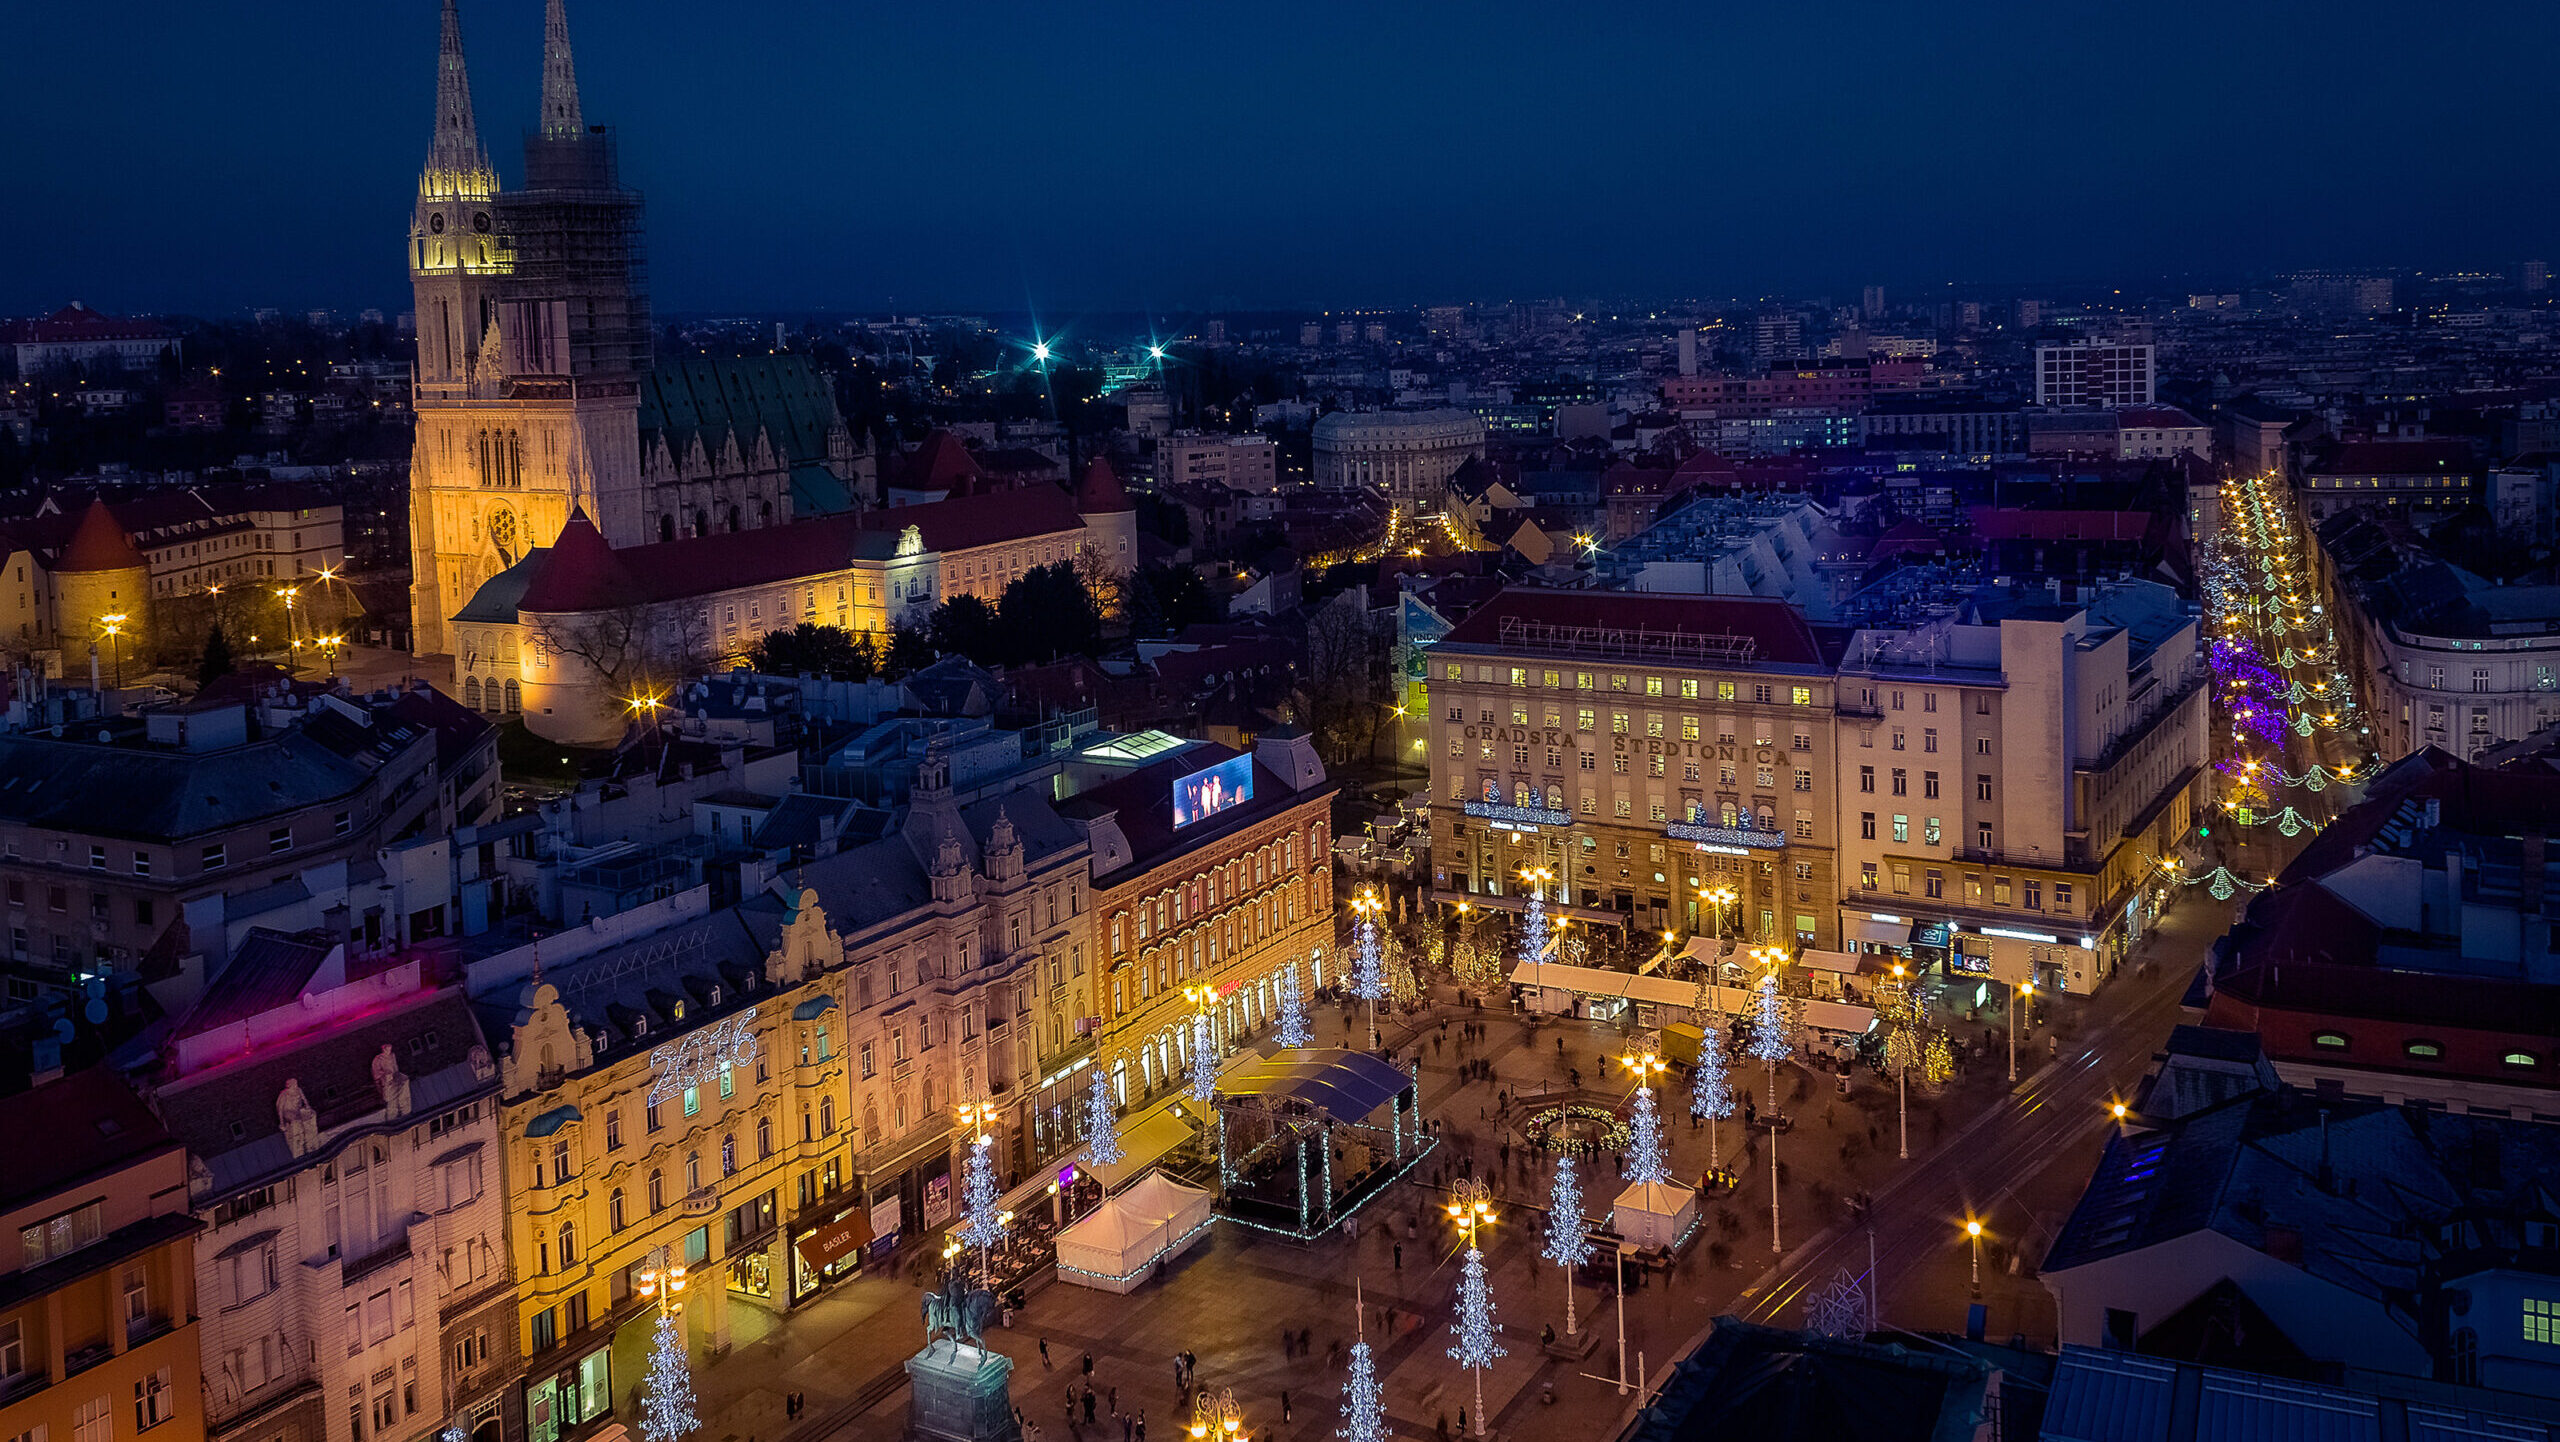 overlooking one of the many Croatian Christmas markets - Advent Zagreb located in the city's captial